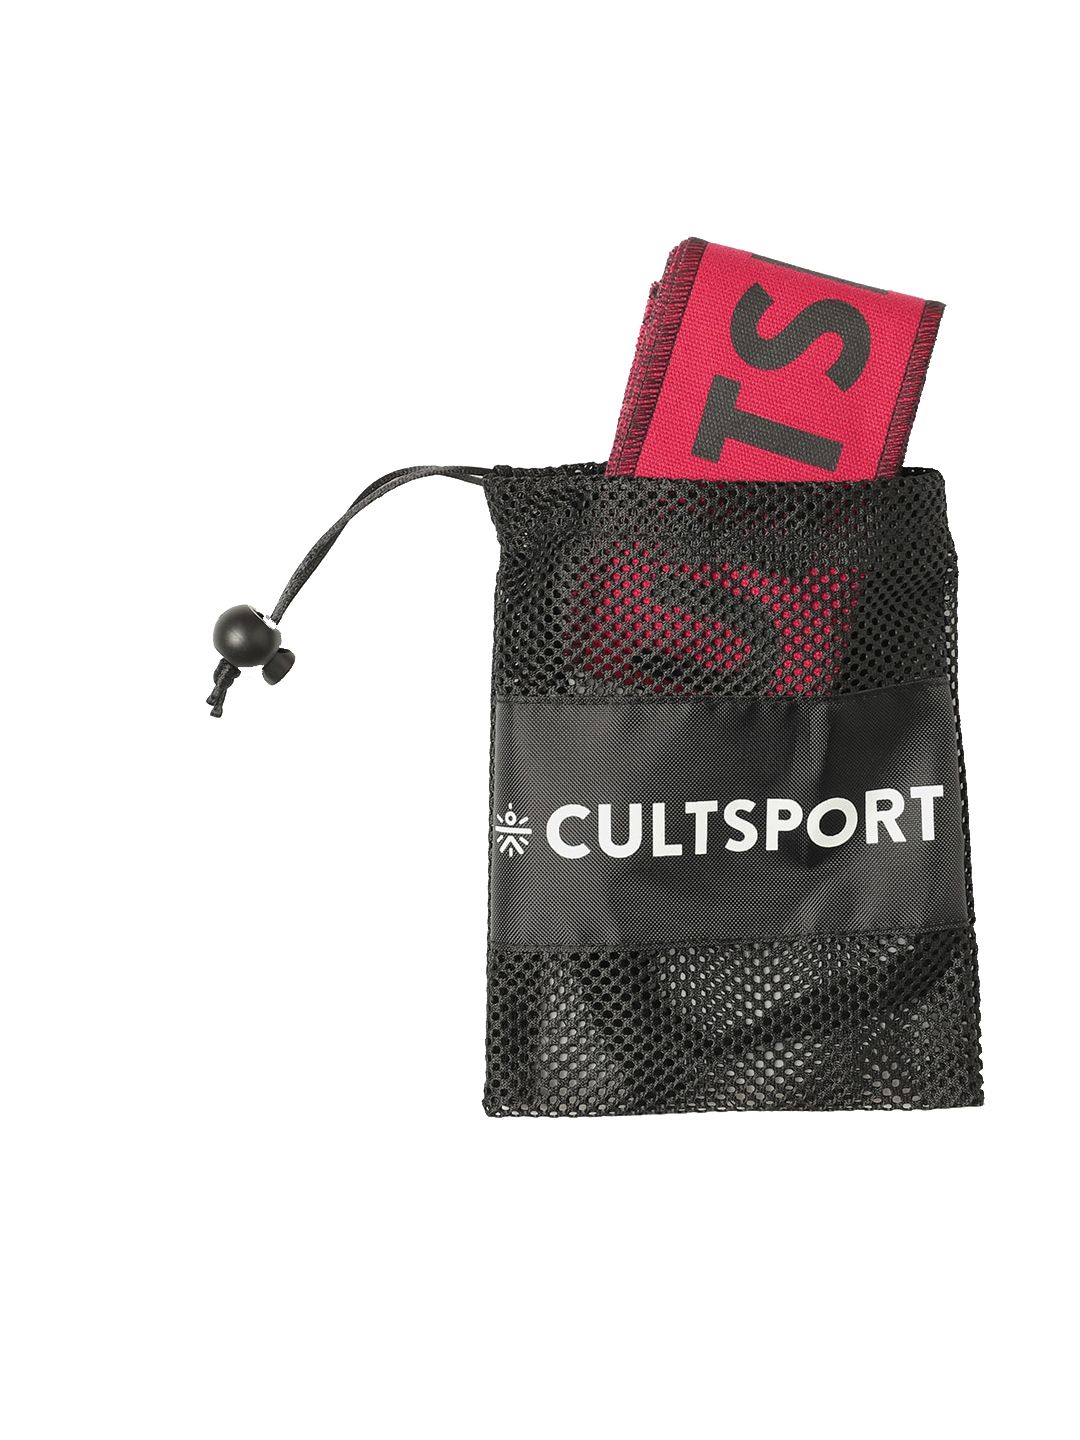 Cultsport Unisex Red Wrist Protection Wrap Price in India